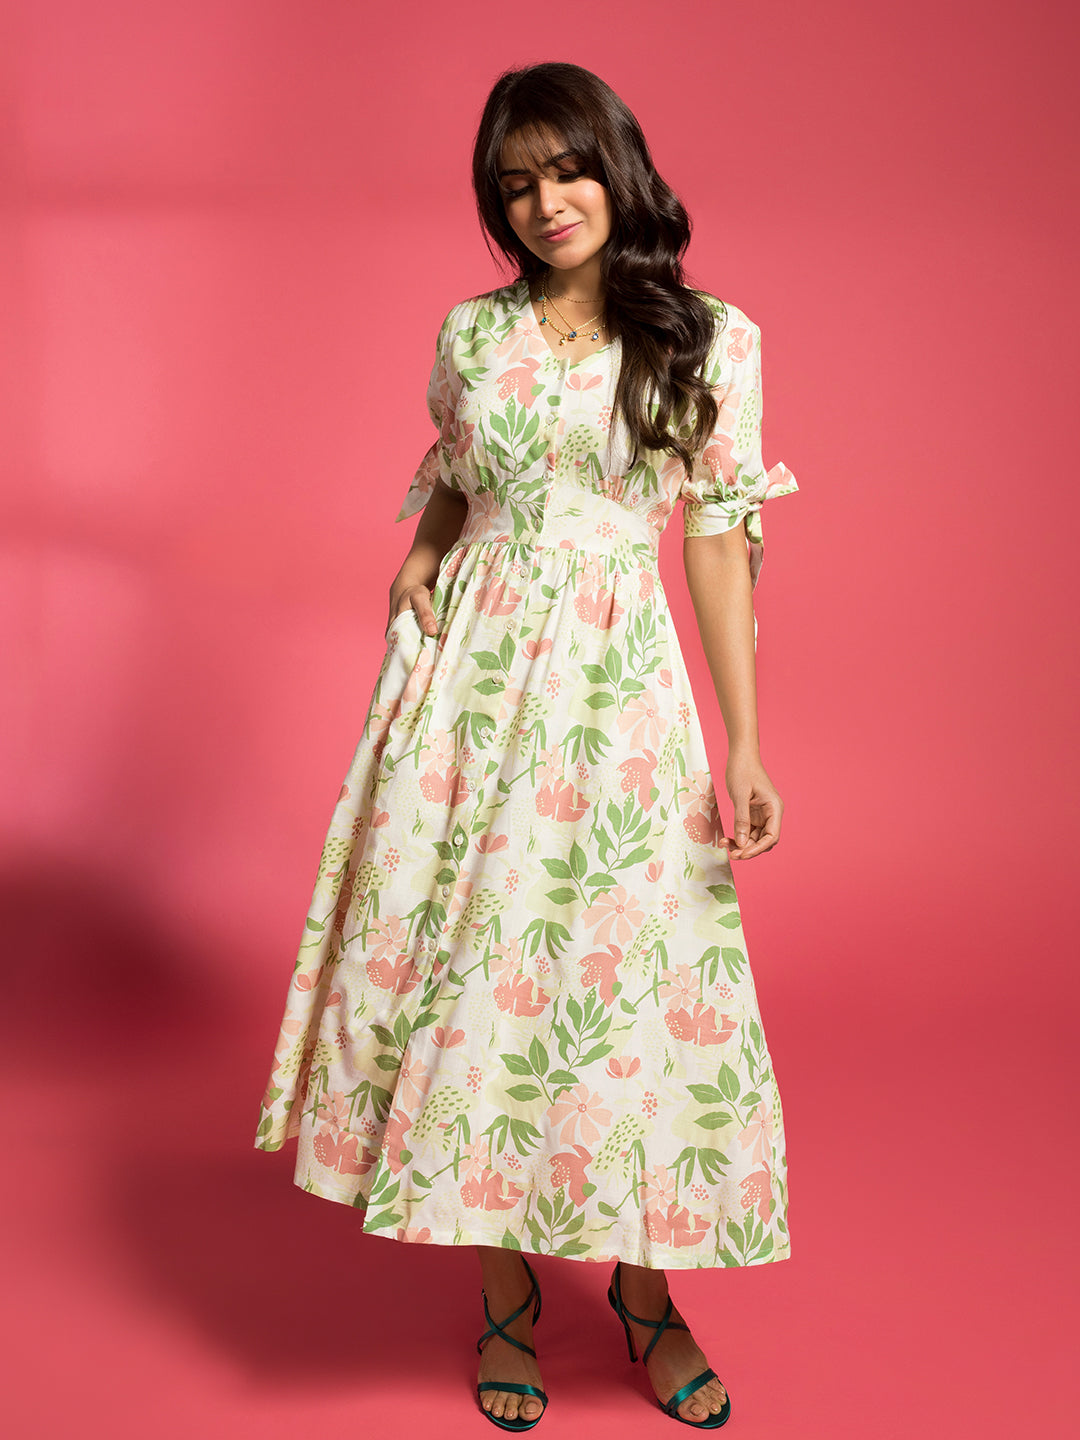 Samantha Ruth Prabhu for SAAKI - Summer Crush Paint With Love Floral Printed Fit & Flare Dress